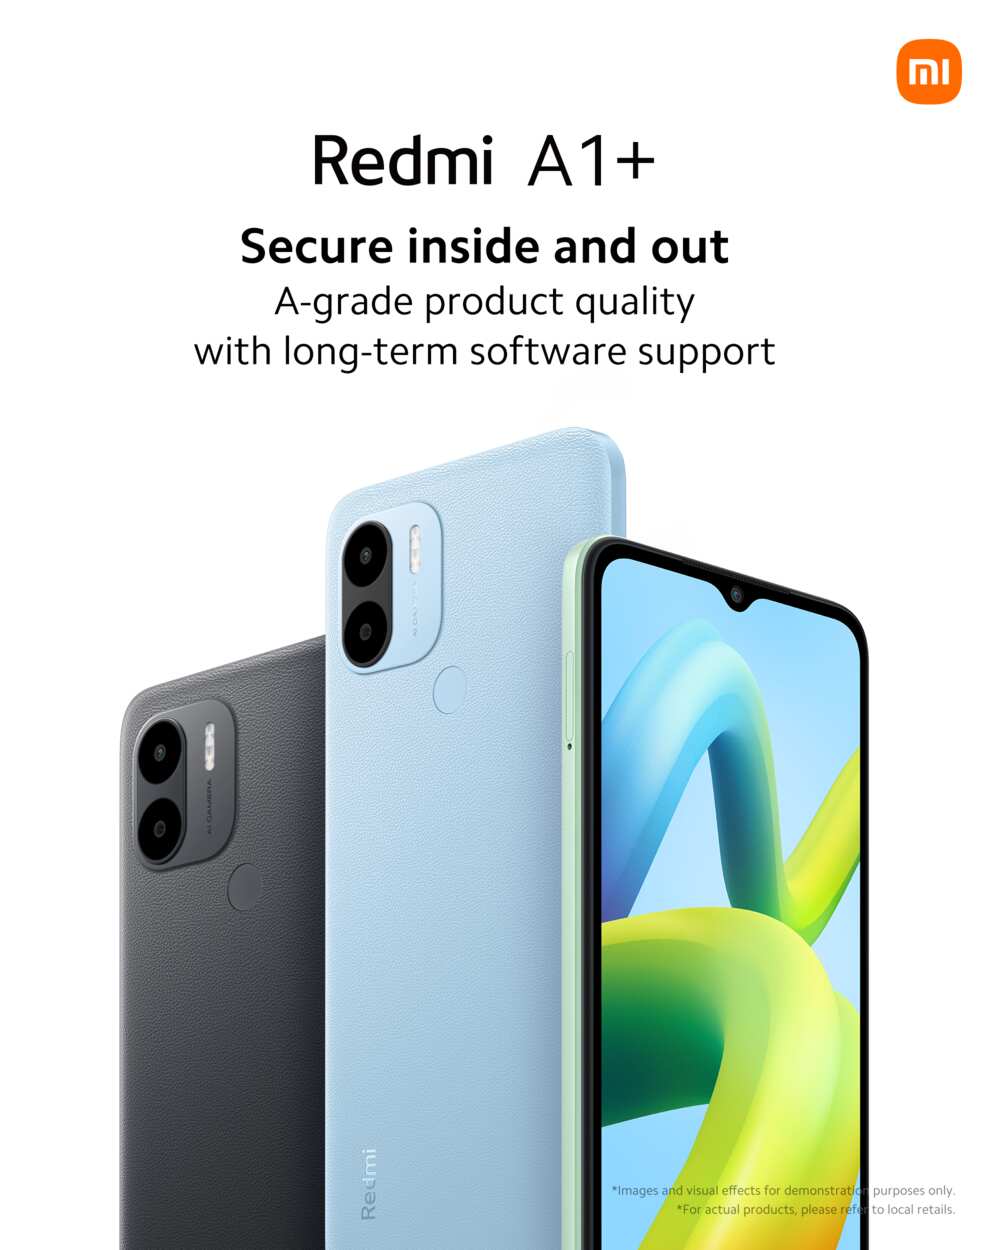 Redmi A1+: The Most Affordable, Versatile and Stylish Redmi Yet